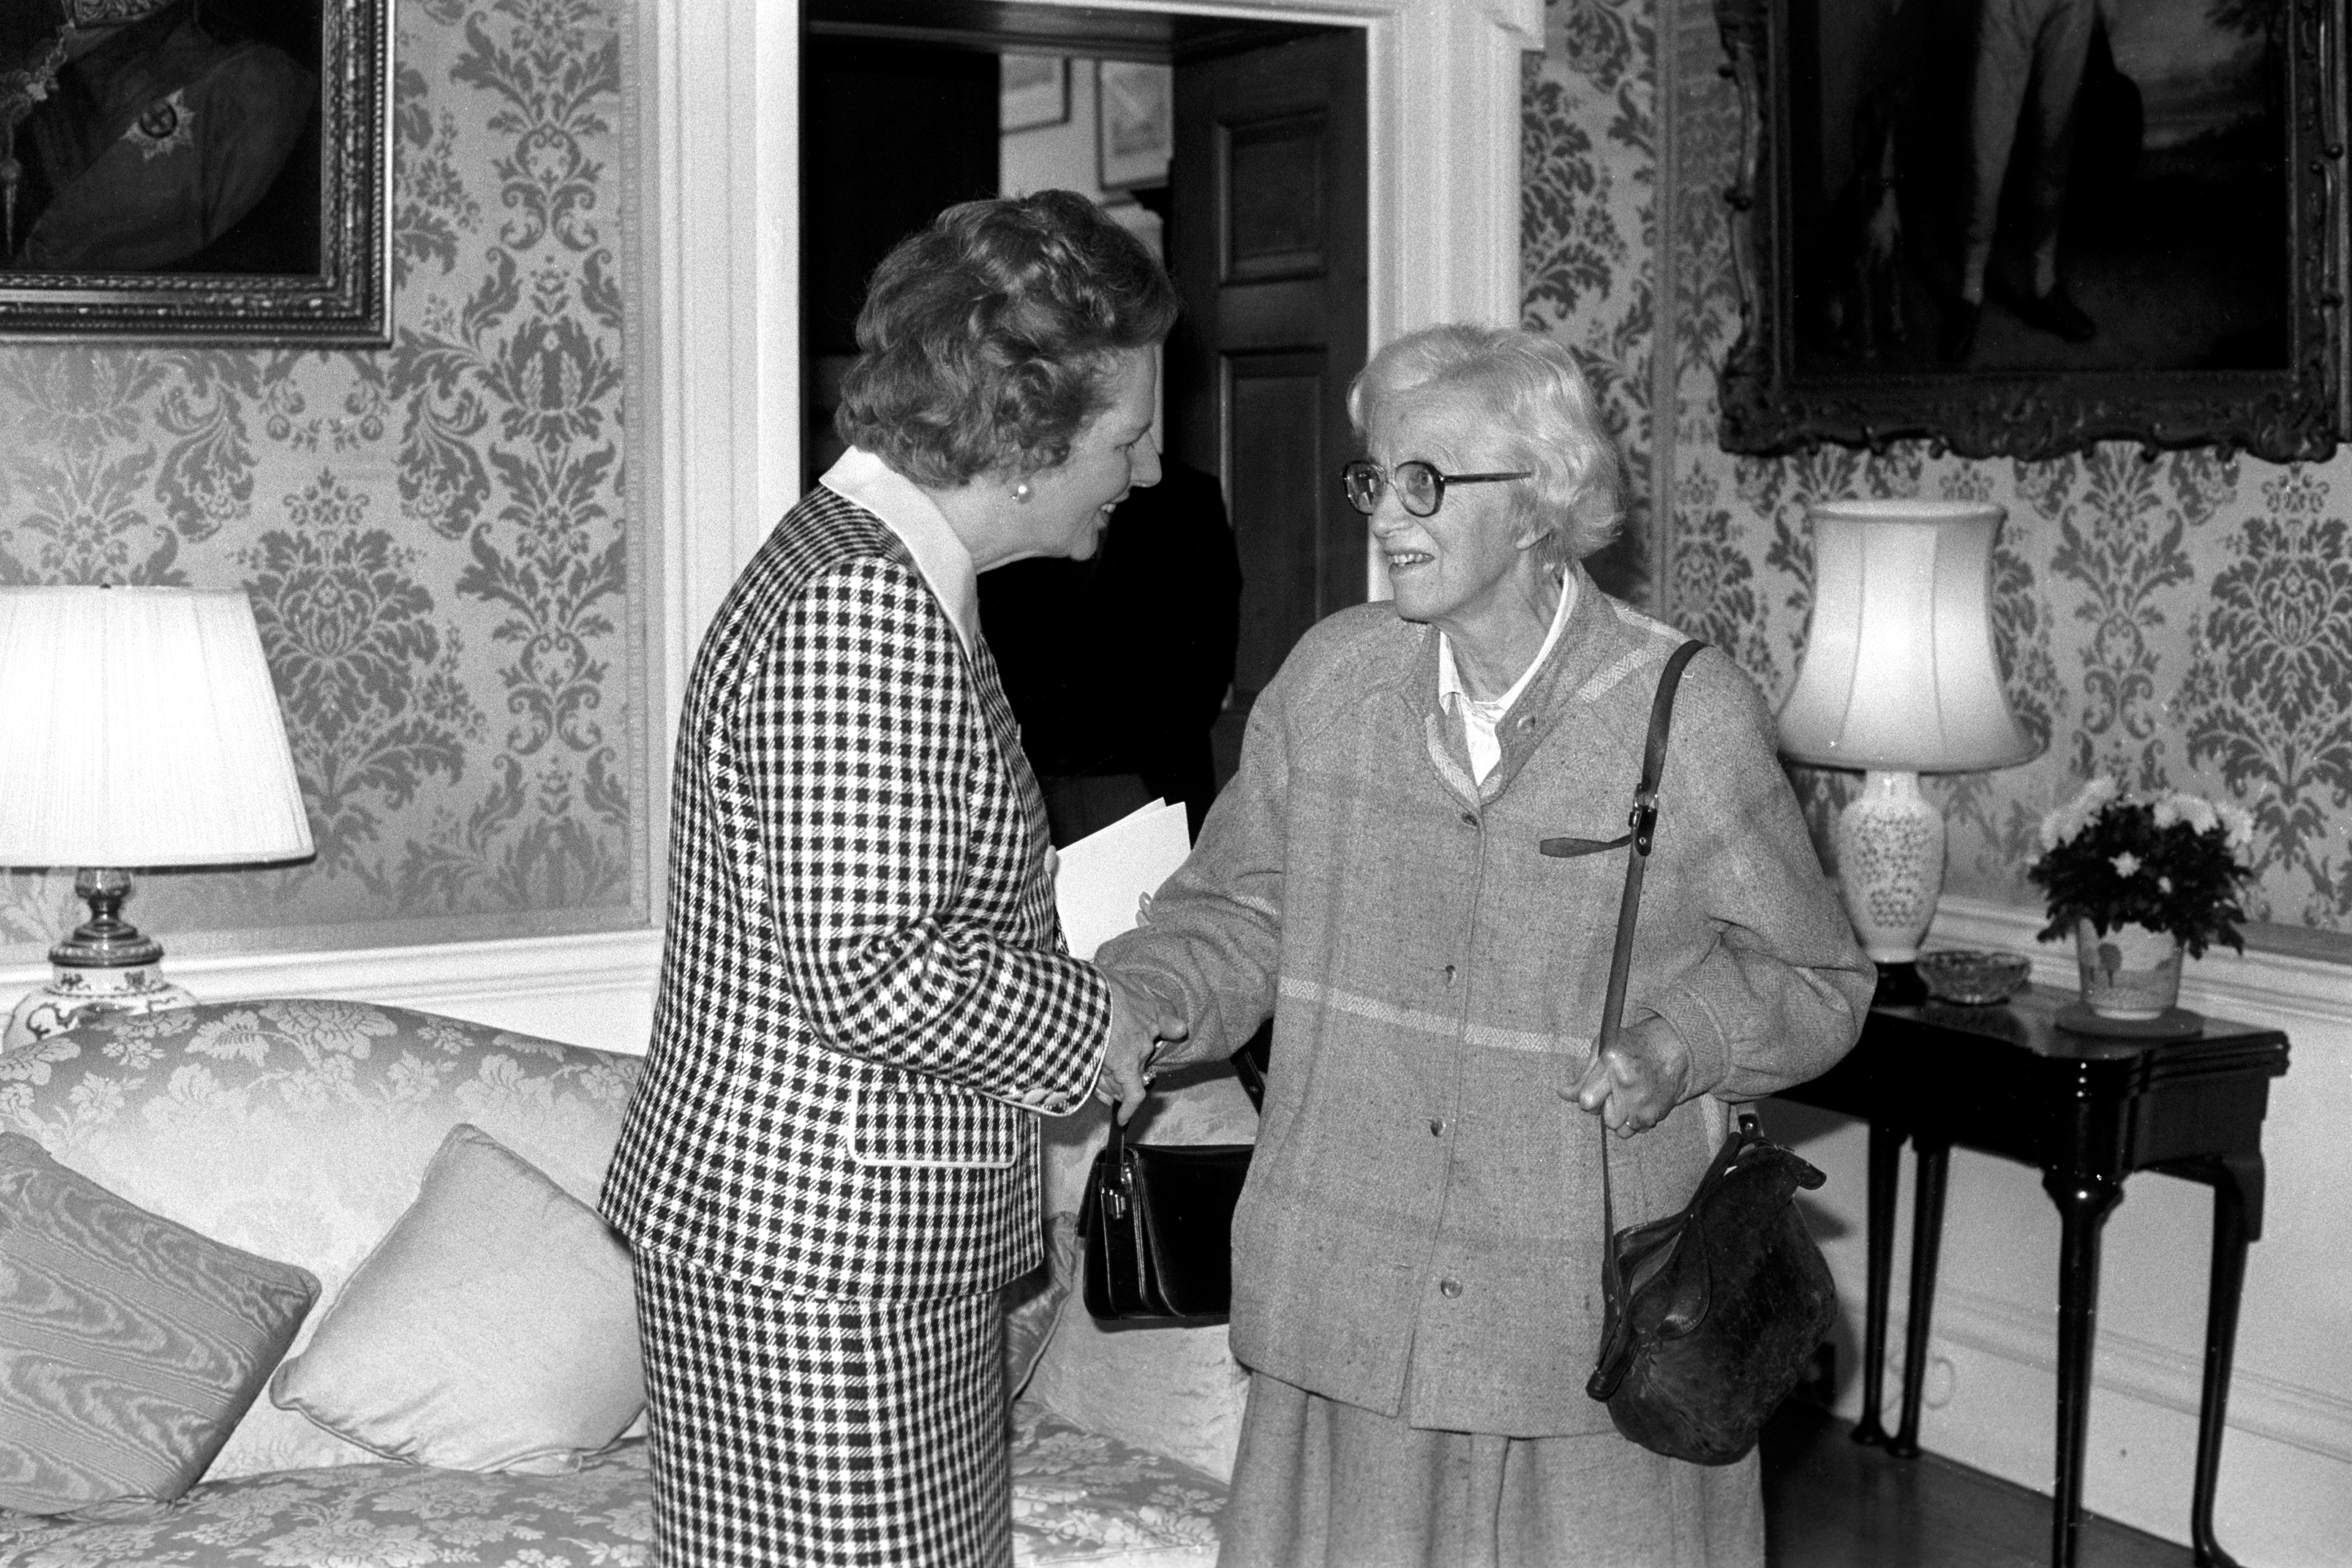 Then-PM Margaret Thatcher greets her former tutor, 78-year-old Professor Dorothy Hodgkin, before the luncheon for Nobel prizewinners given by Margaret Thatcher at Downing Street, London. Professor Hodgkin was honoured for her work on the structure of penicillin and vitamin B12